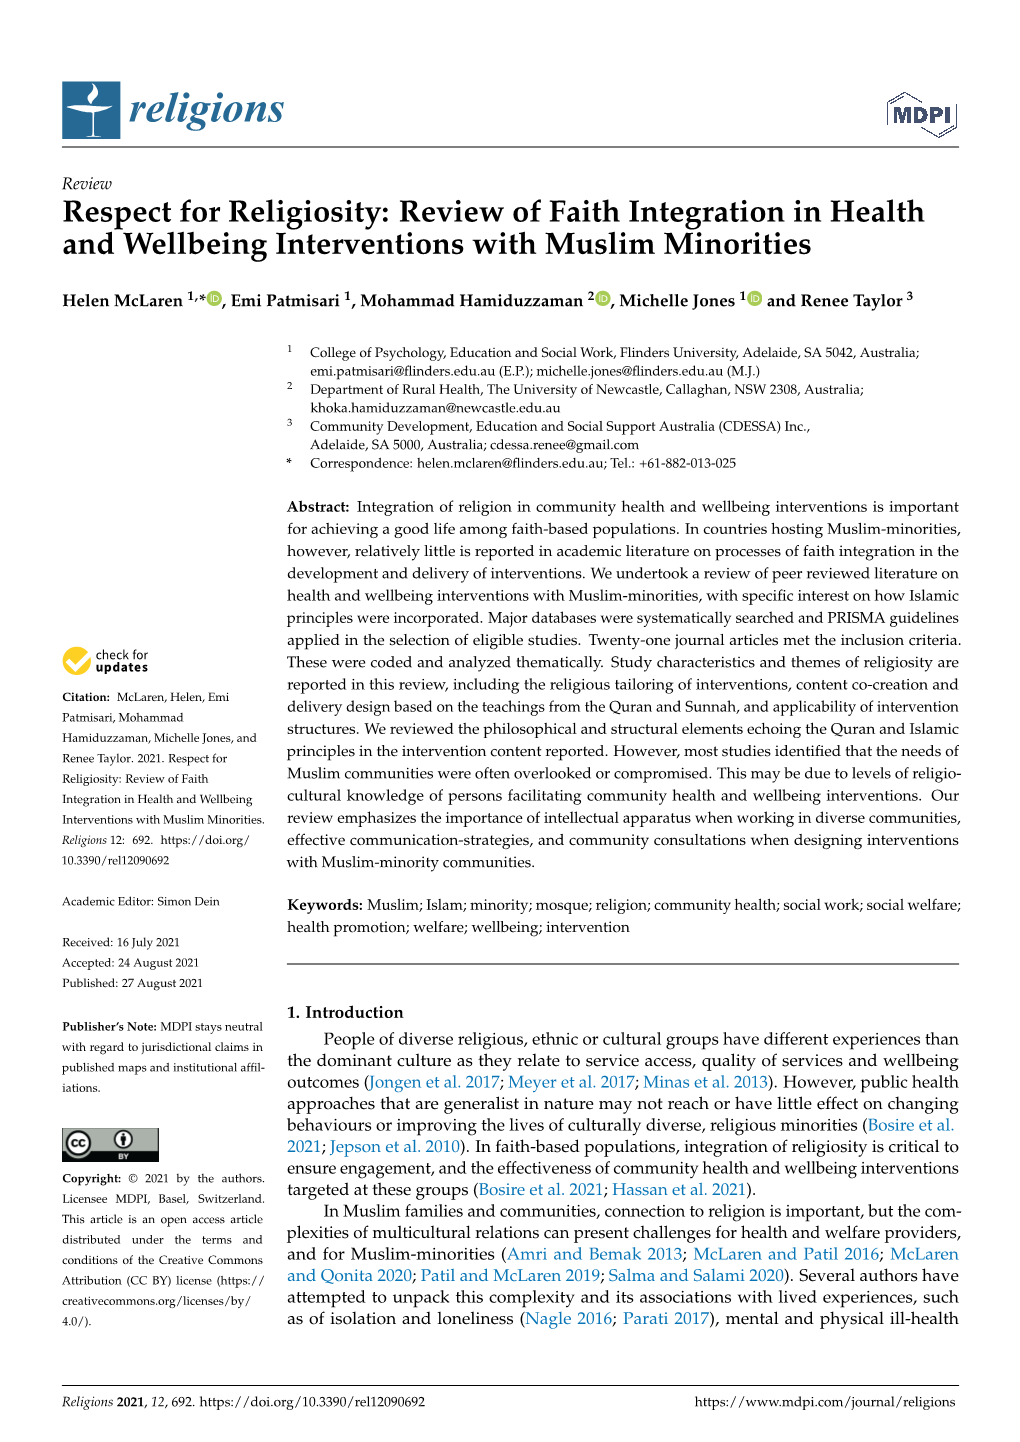 Review of Faith Integration in Health and Wellbeing Interventions with Muslim Minorities